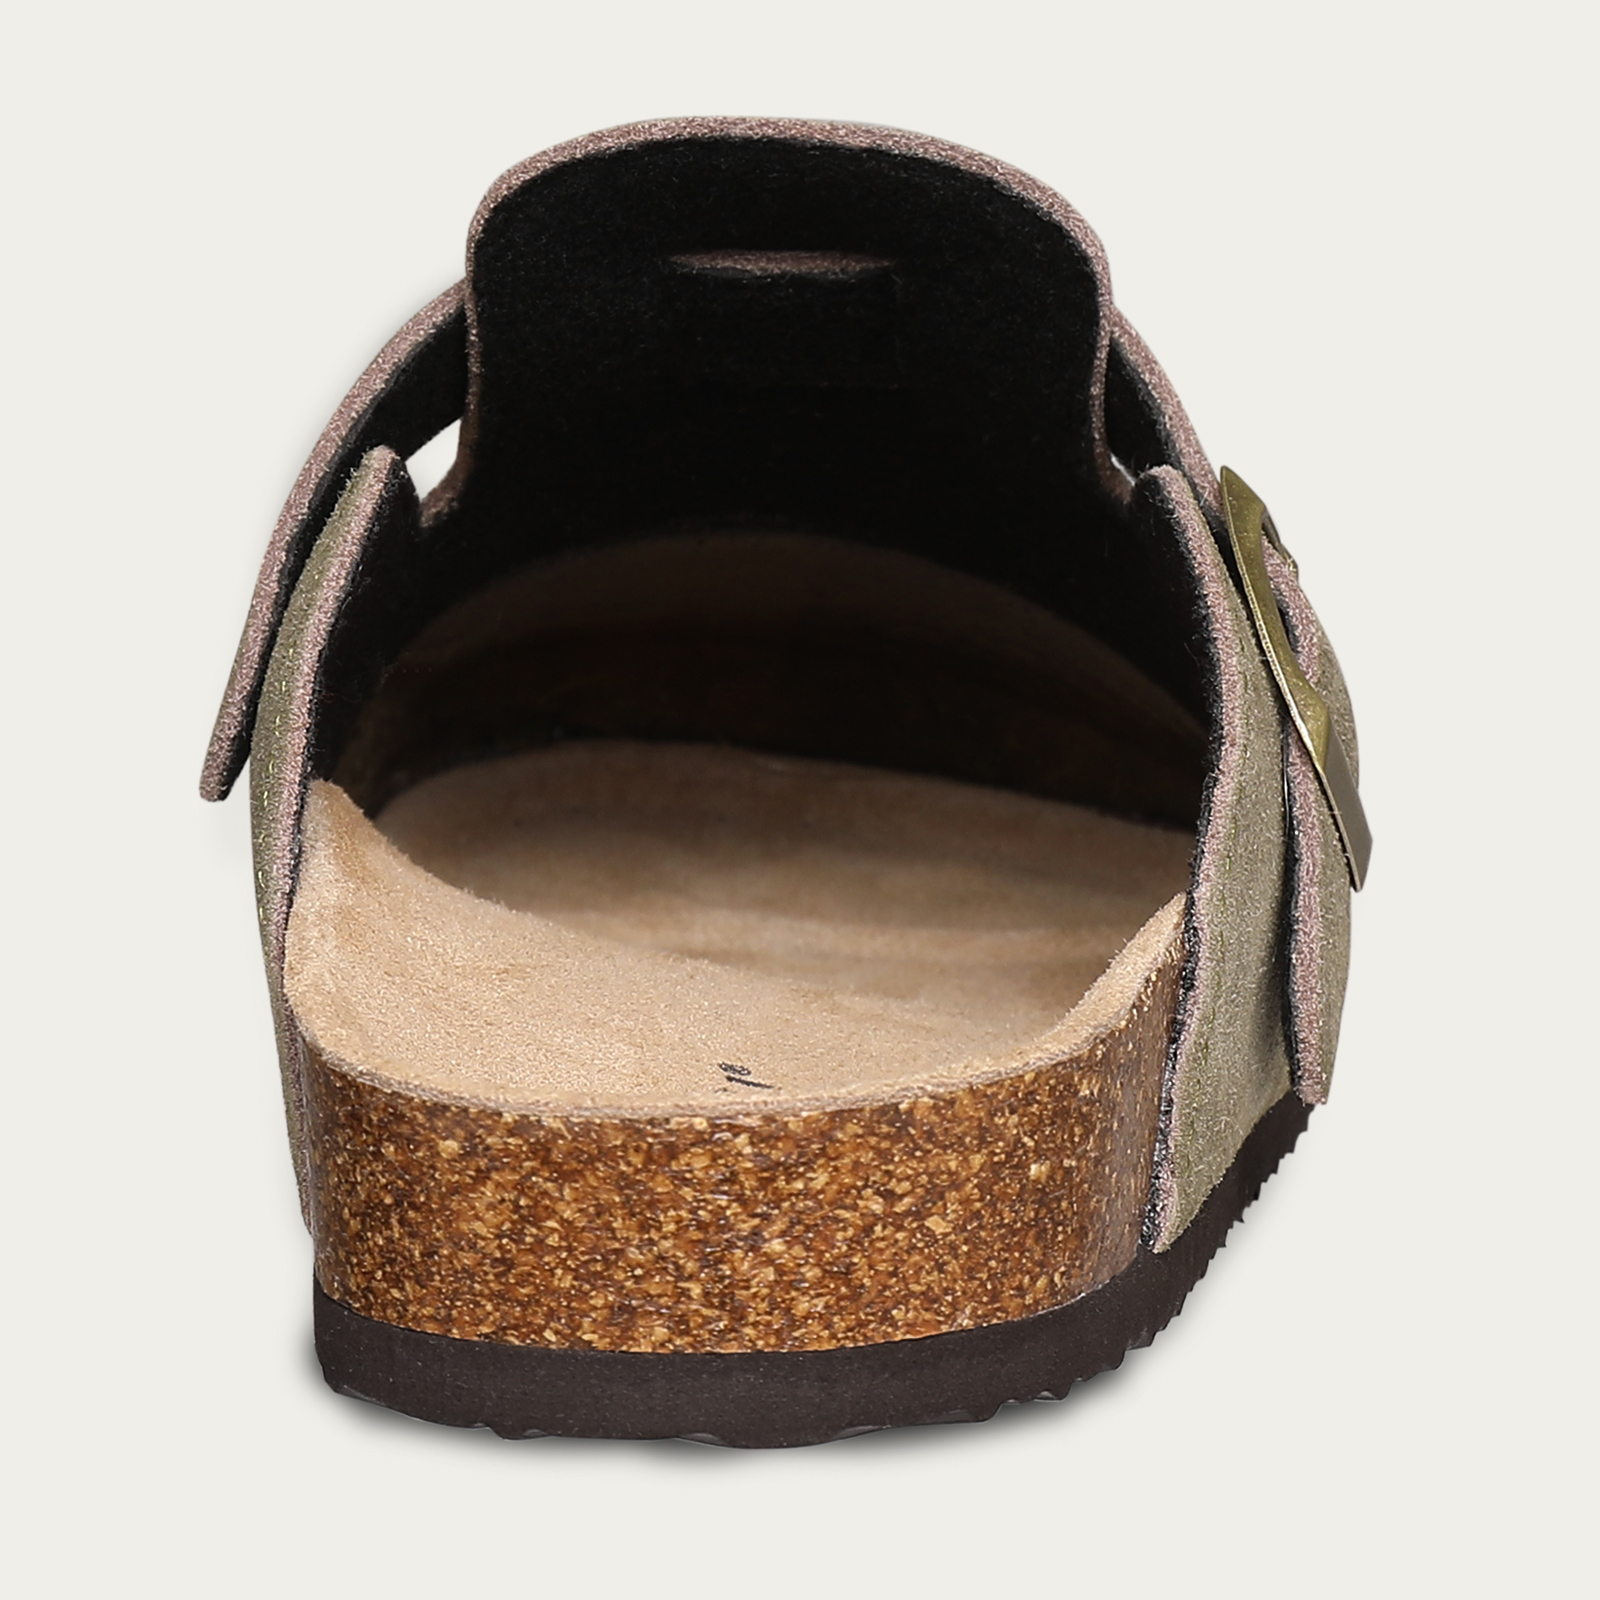 come4buy.com-Cork Insole Sandals With Arch Support Outdoor Lovers Beach Sandals